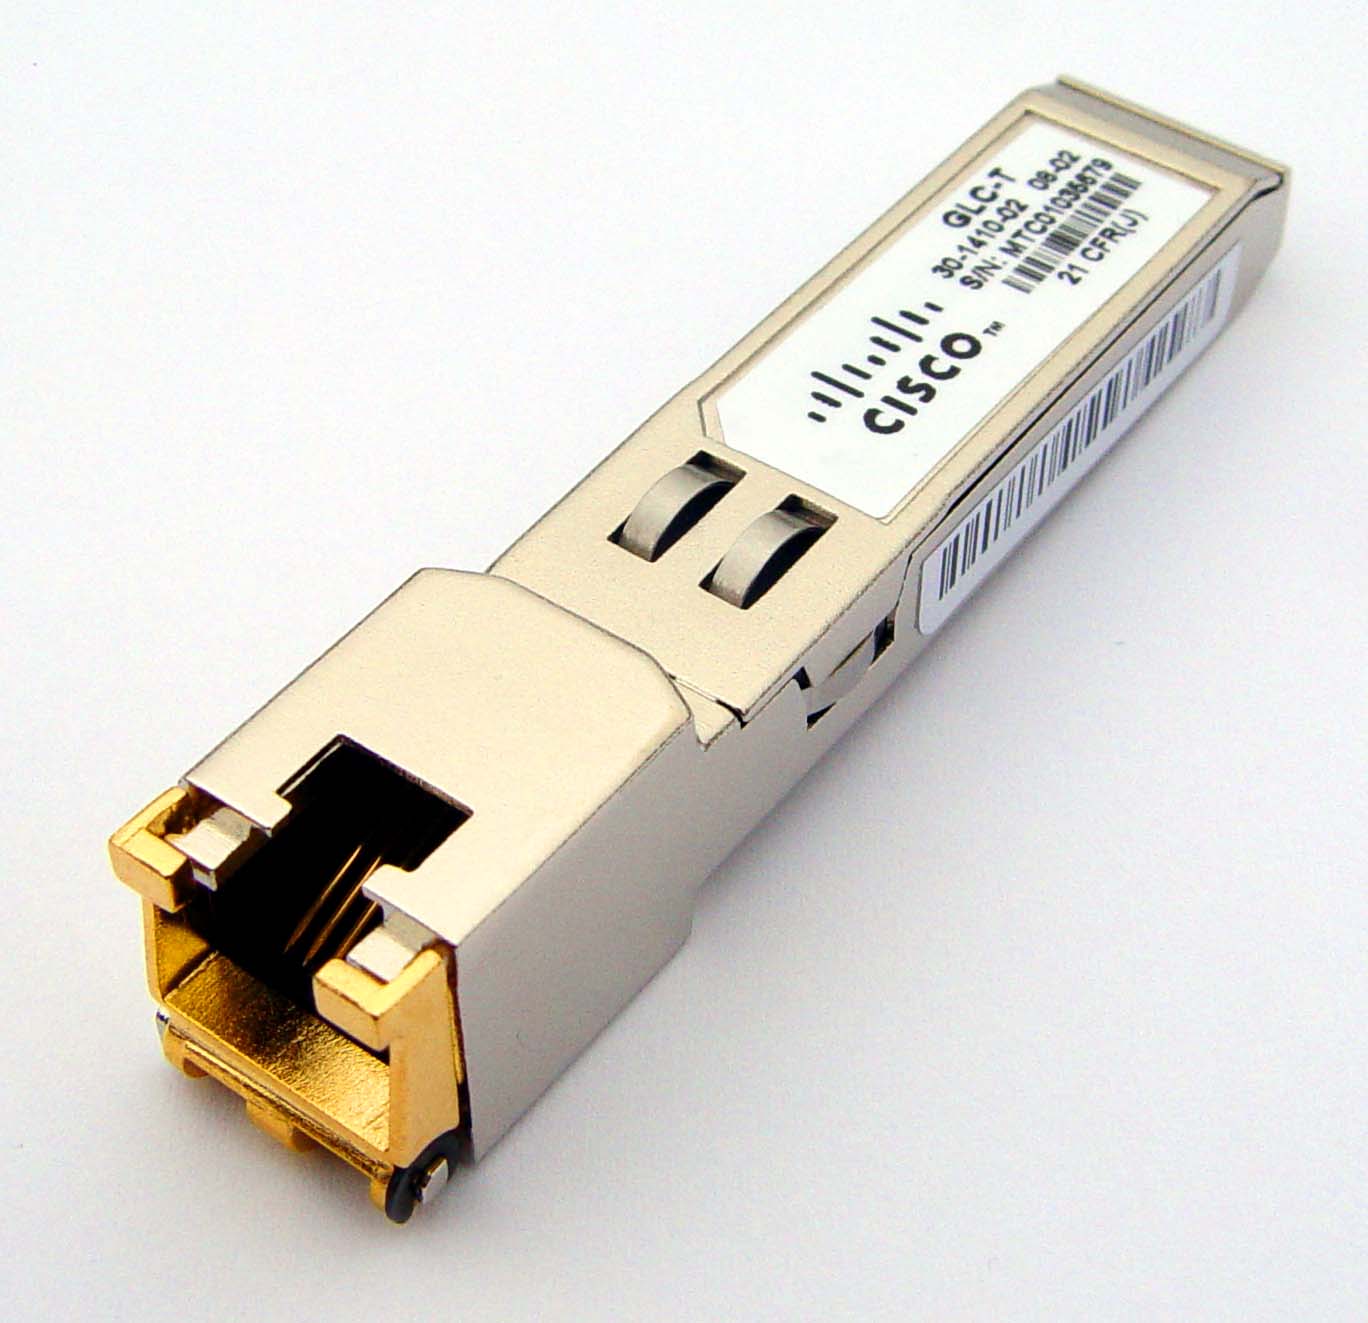 Cisco_Systems_GLC-T=_1Gbps_1000Base-T_Plug-in_SFP_GBIC_Transceiver_Module